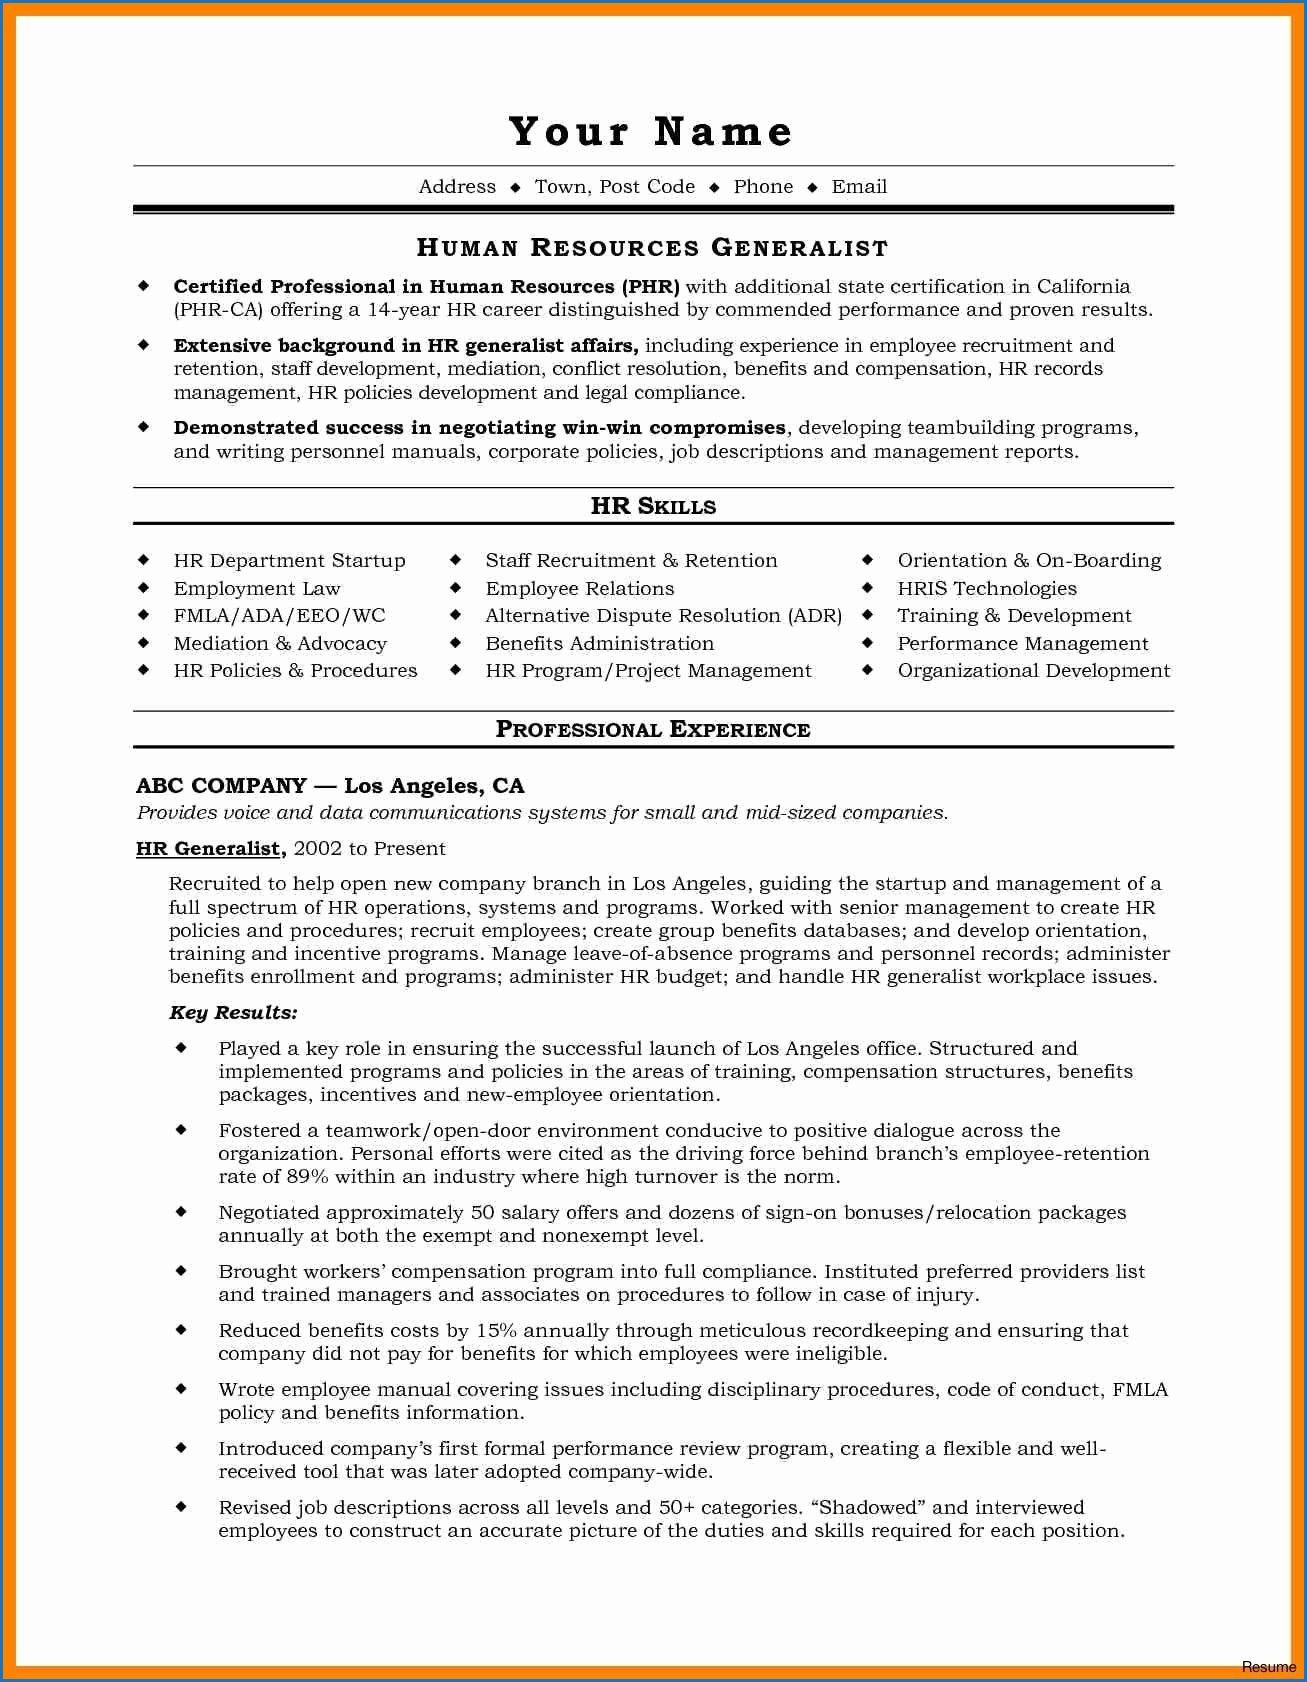 Fmla Experience On A Resume Sample 15 Resume Samples for Ece Teachers Check More at Https://www …